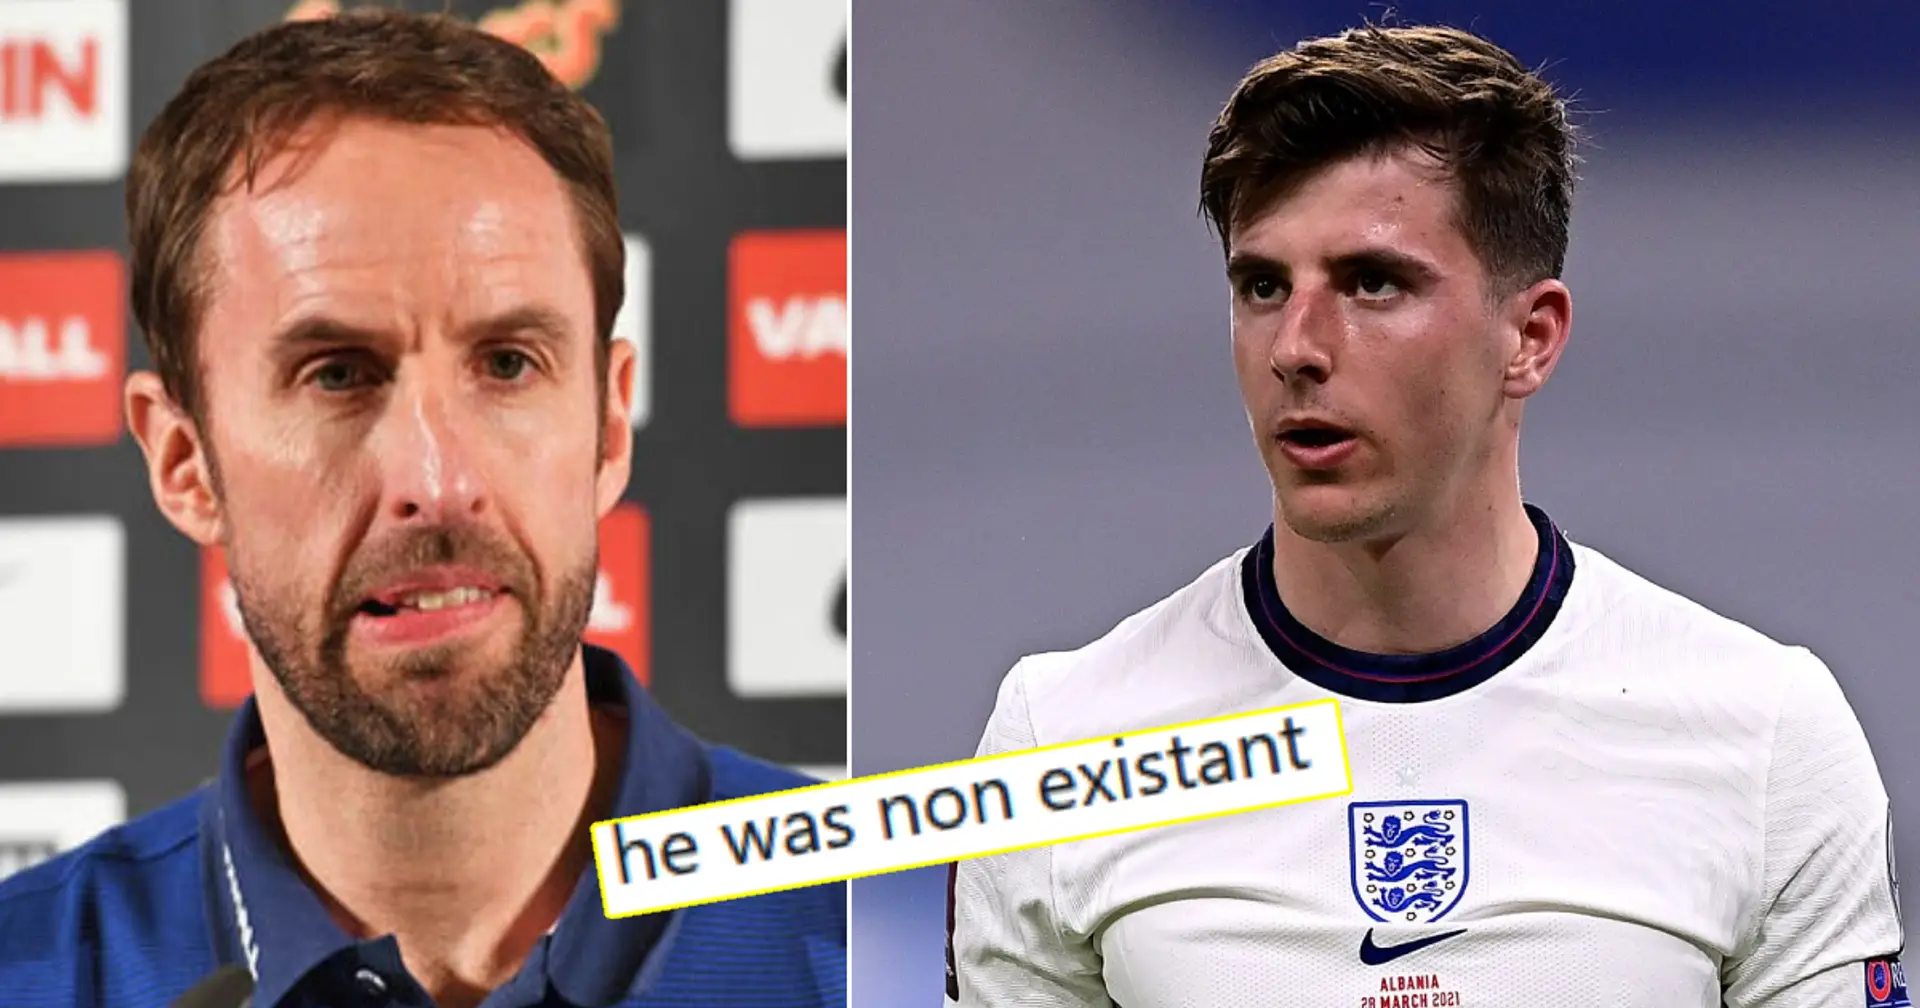 'Bang average': England fans take out their frustration on Mason Mount after failing to beat Hungary